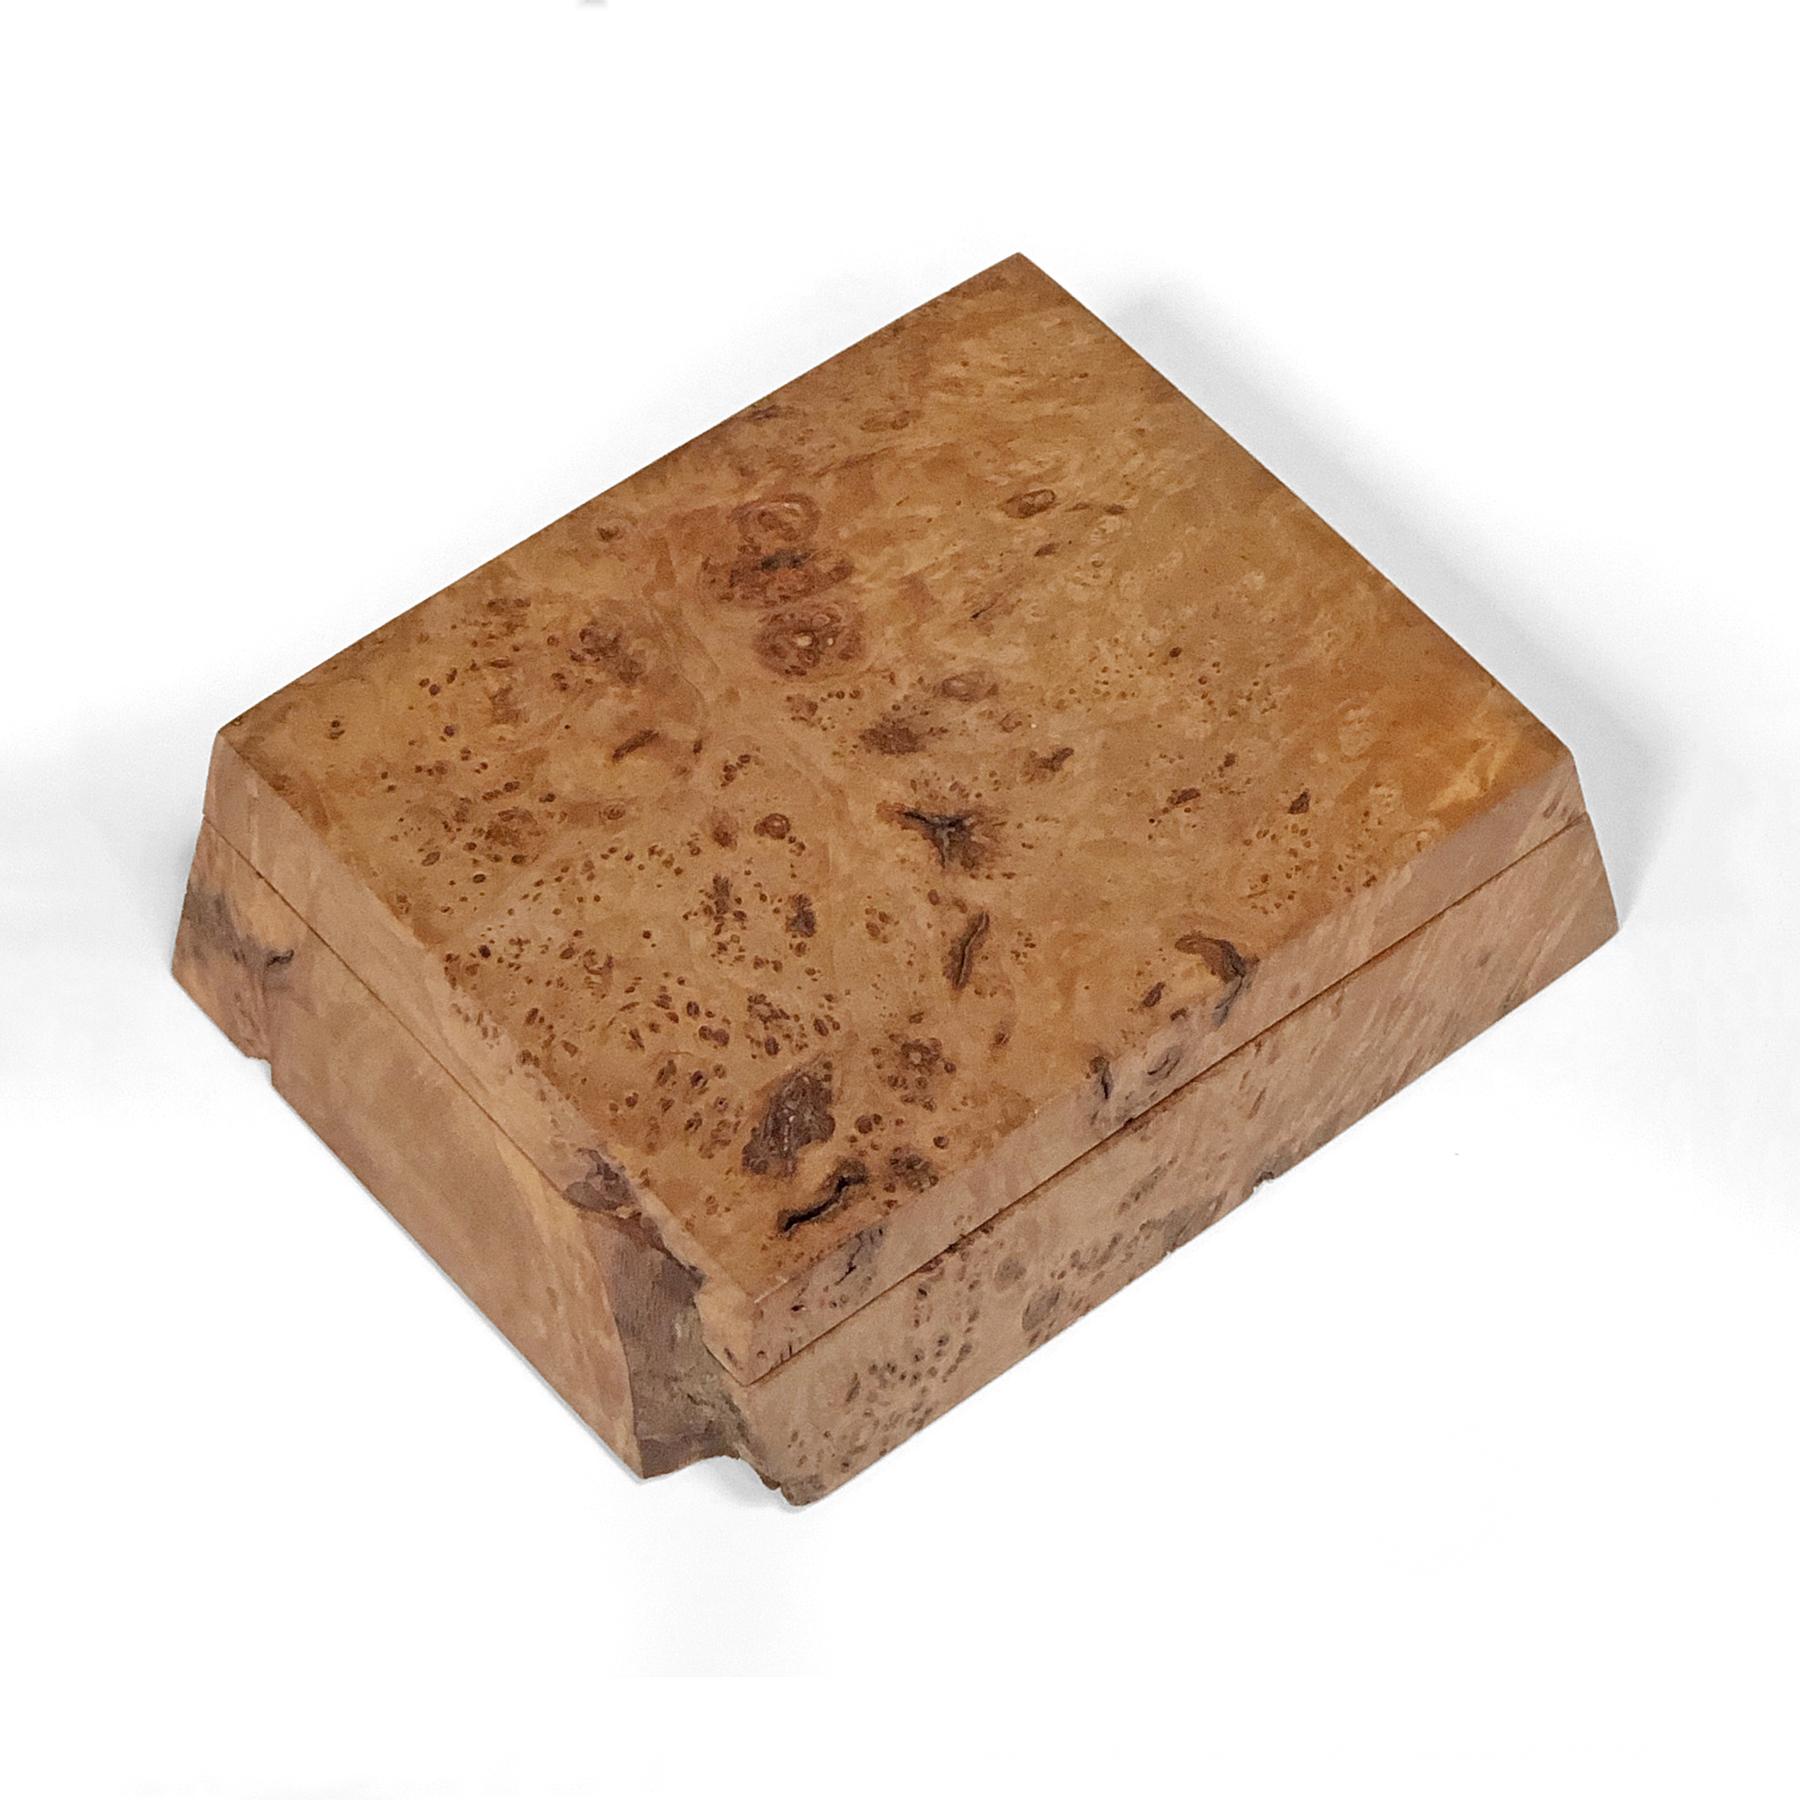 This lovely trinket box in Oregon bird’s-eye maple burl by Silverton, OR woodworker Michael Elkan has a beautiful, rich color and texture. Handcrafted from a single piece of wood, the box is hand signed and comes with the original literature.